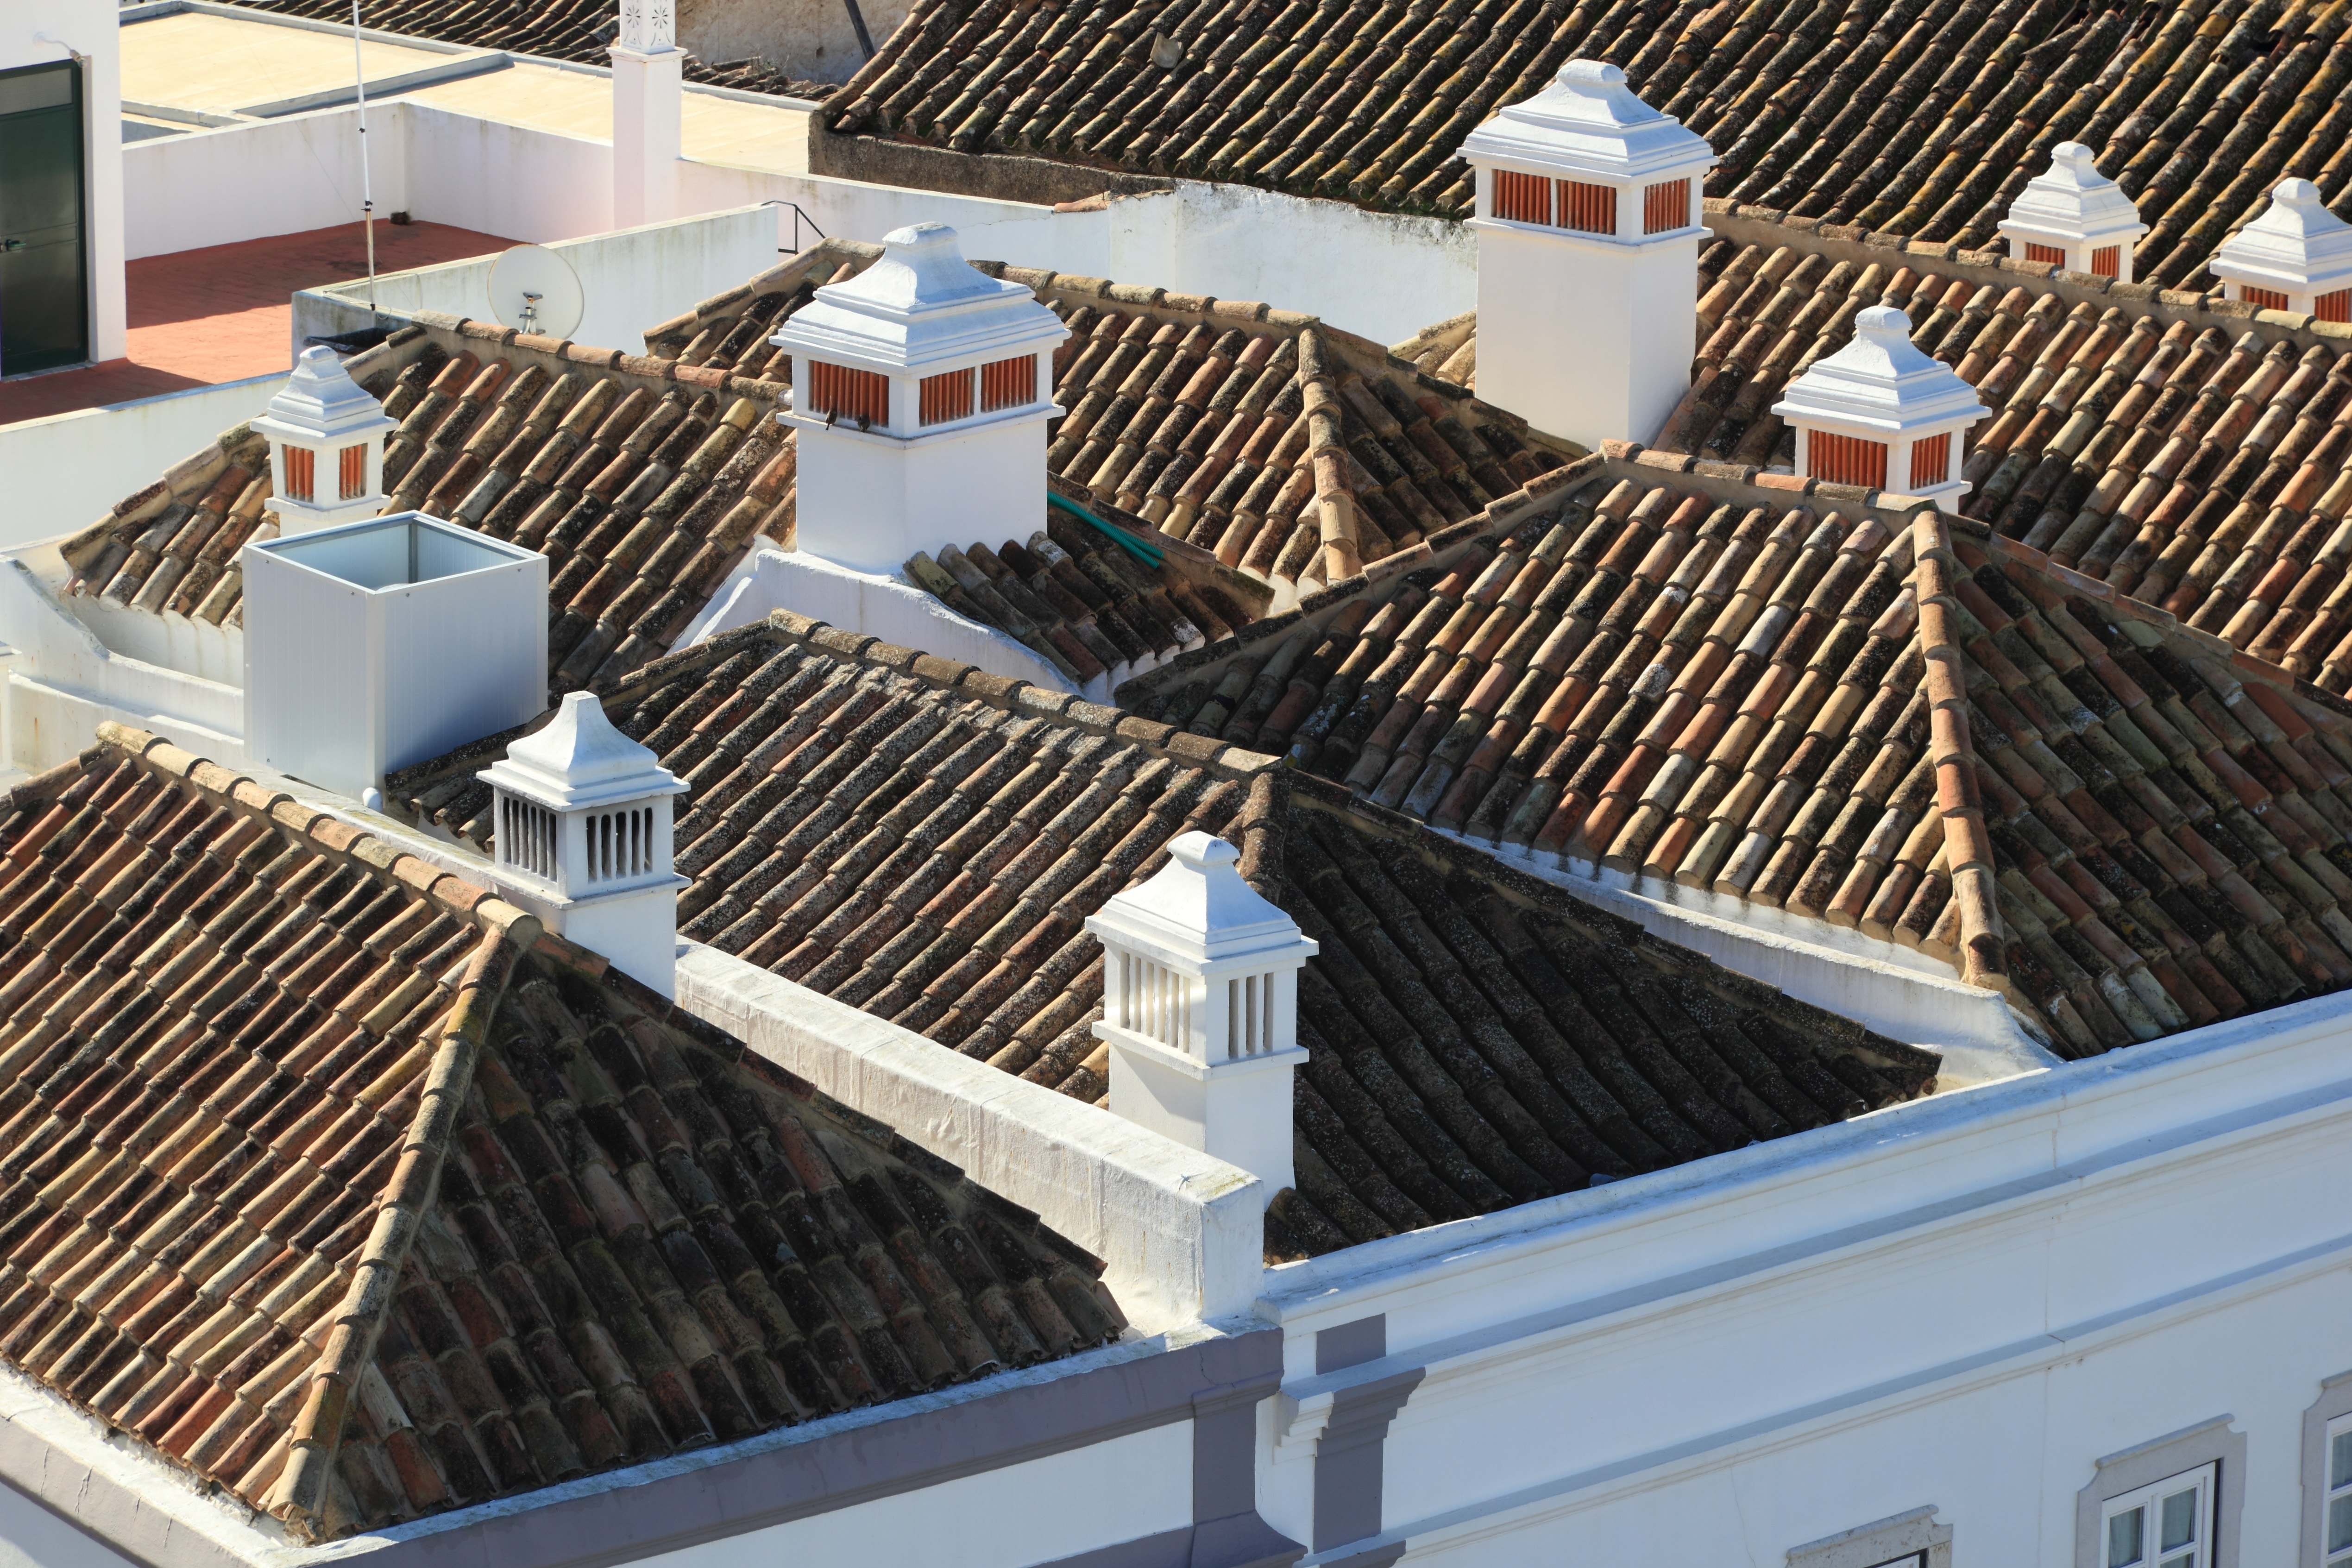 Portugal, Rooftops, Roof, Faro, industry, roof